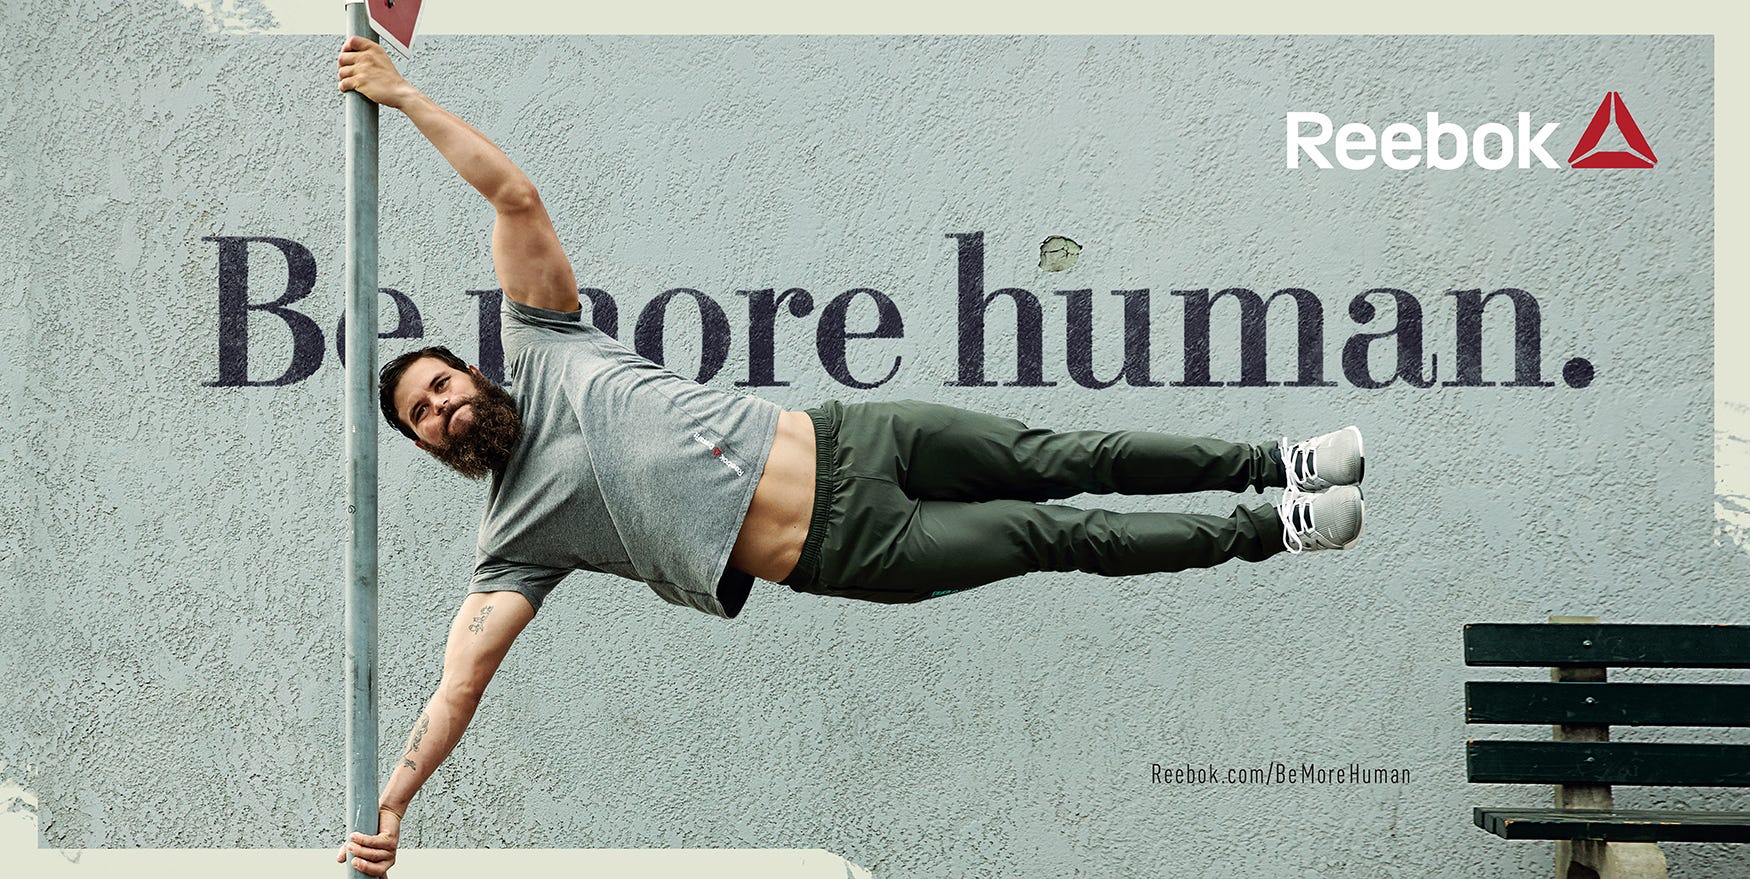 Reebok Attempts To Be More Human 